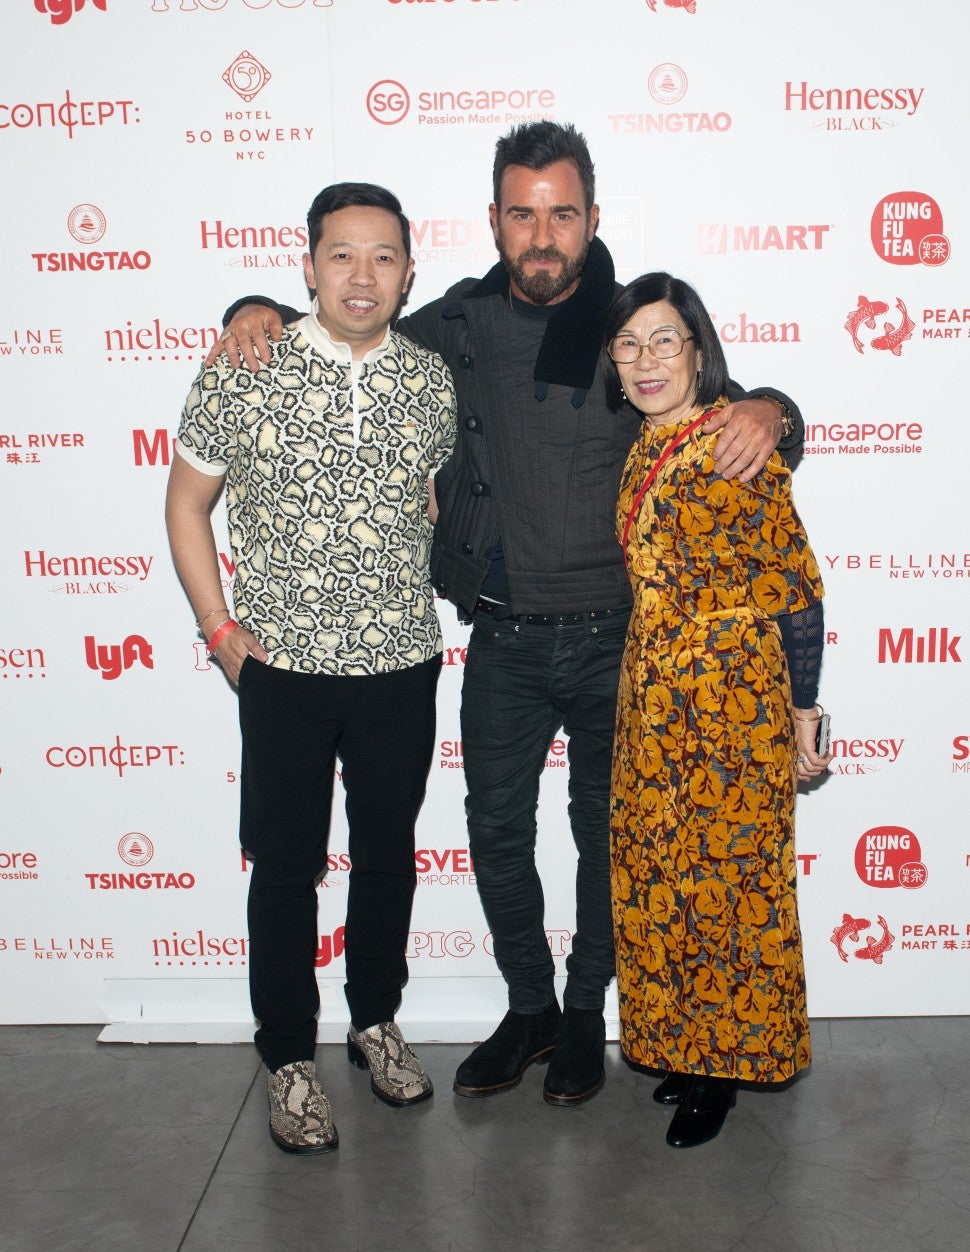 Humberto Leon, Justin Theroux and Wendy Leon attend the Opening Ceremony Lunar New Year 2019 celebration during New York Fashion Week on February 10, 2019 in New York City.